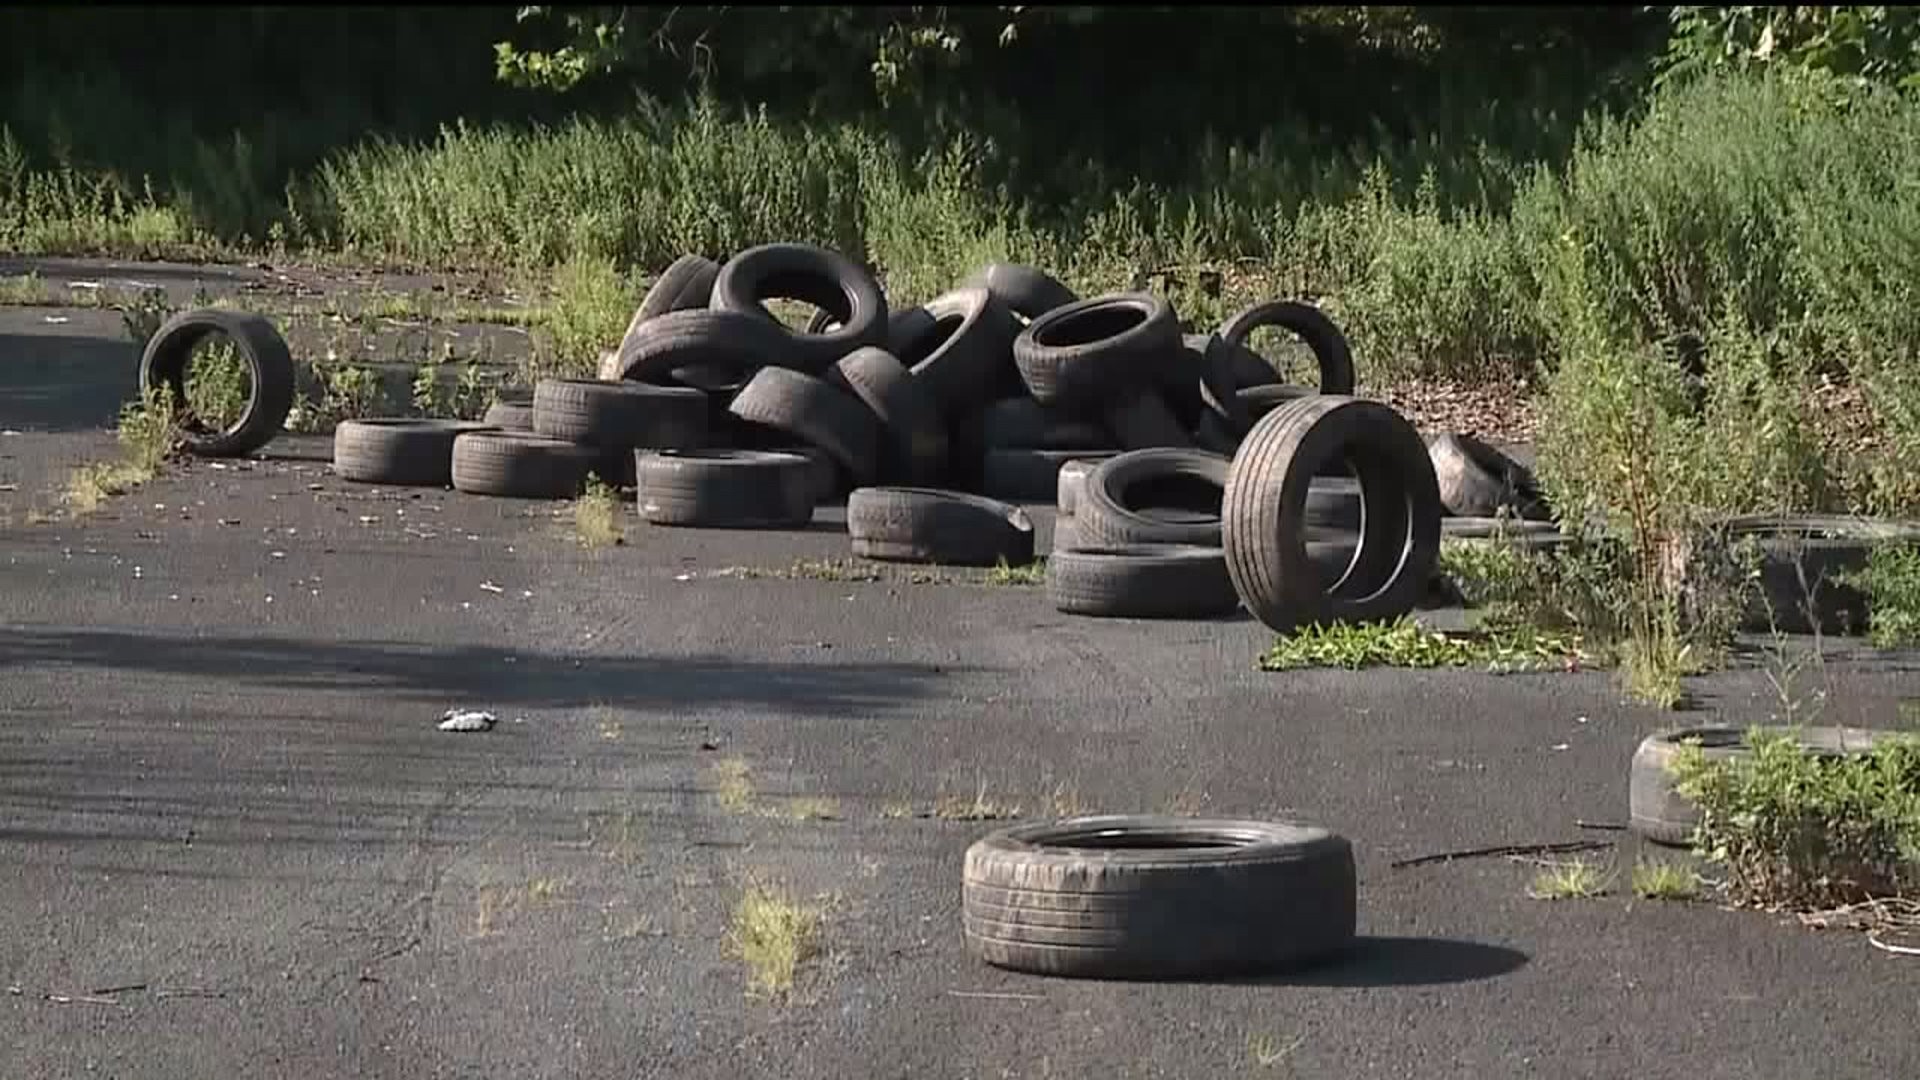 More Charges for Woman Accused of Dumping Tires